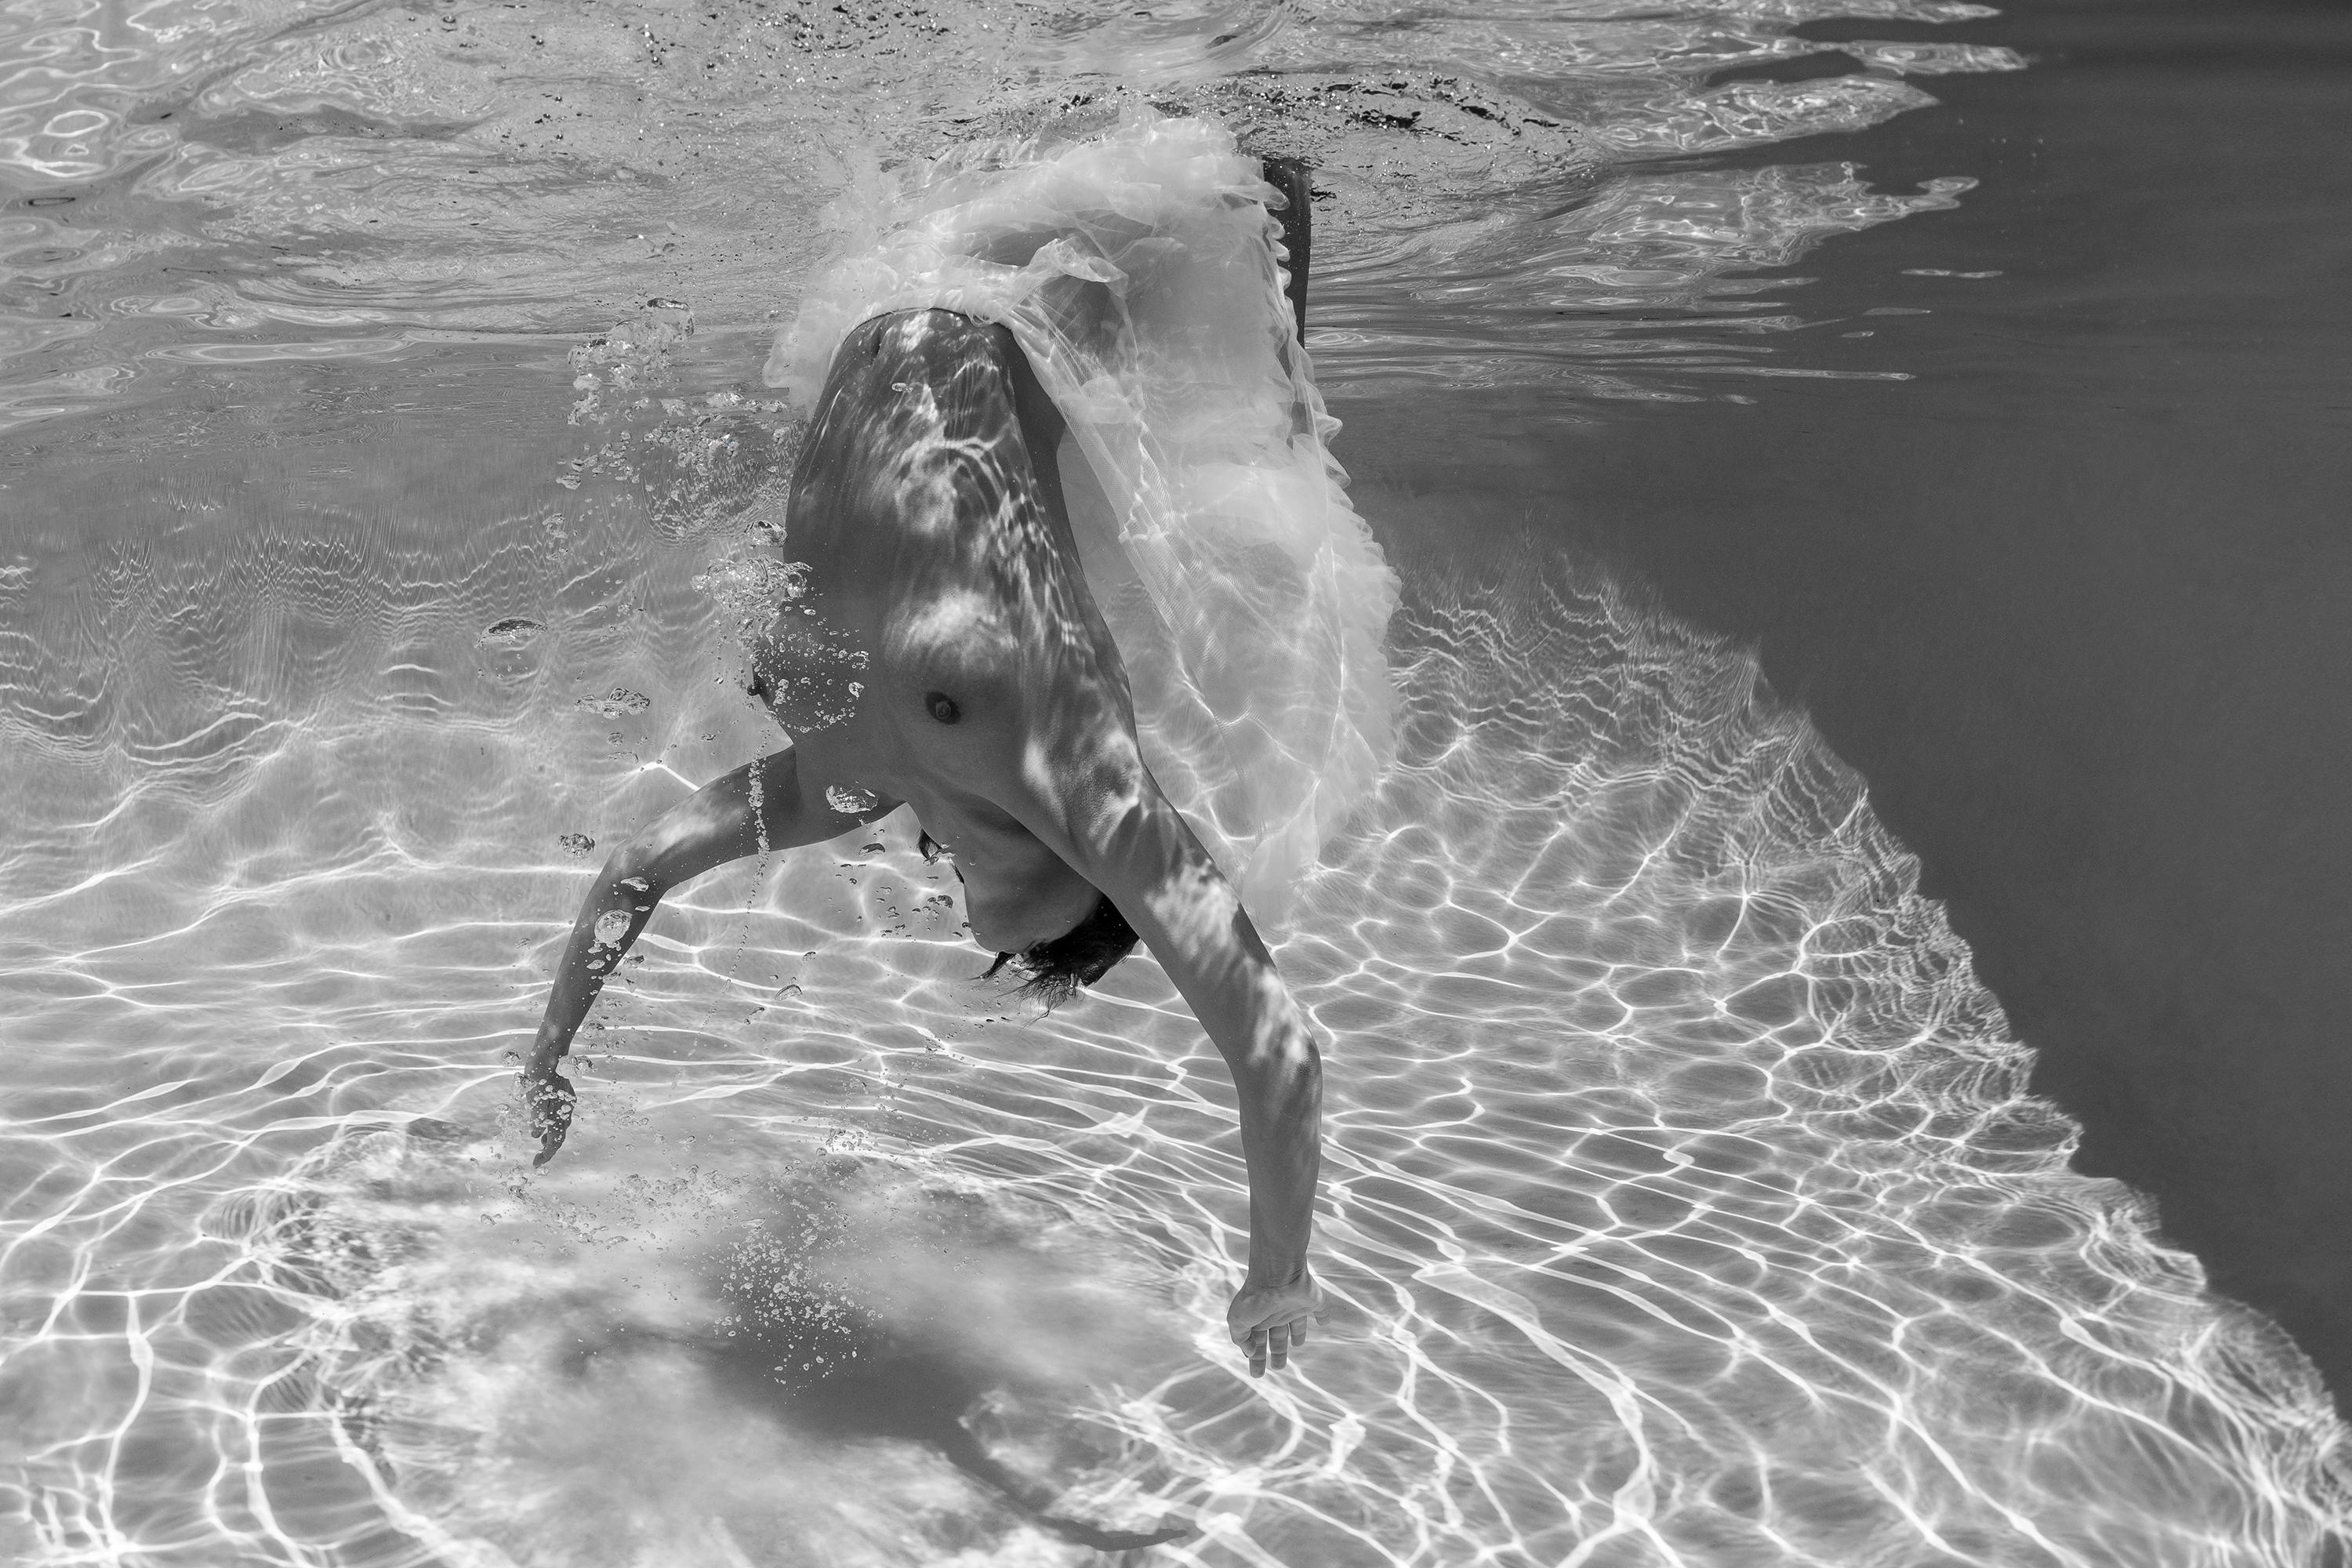 Alex Sher Nude Photograph - Shapes and Shadows - underwater nude b&w photograph - archival pigment 16x24"